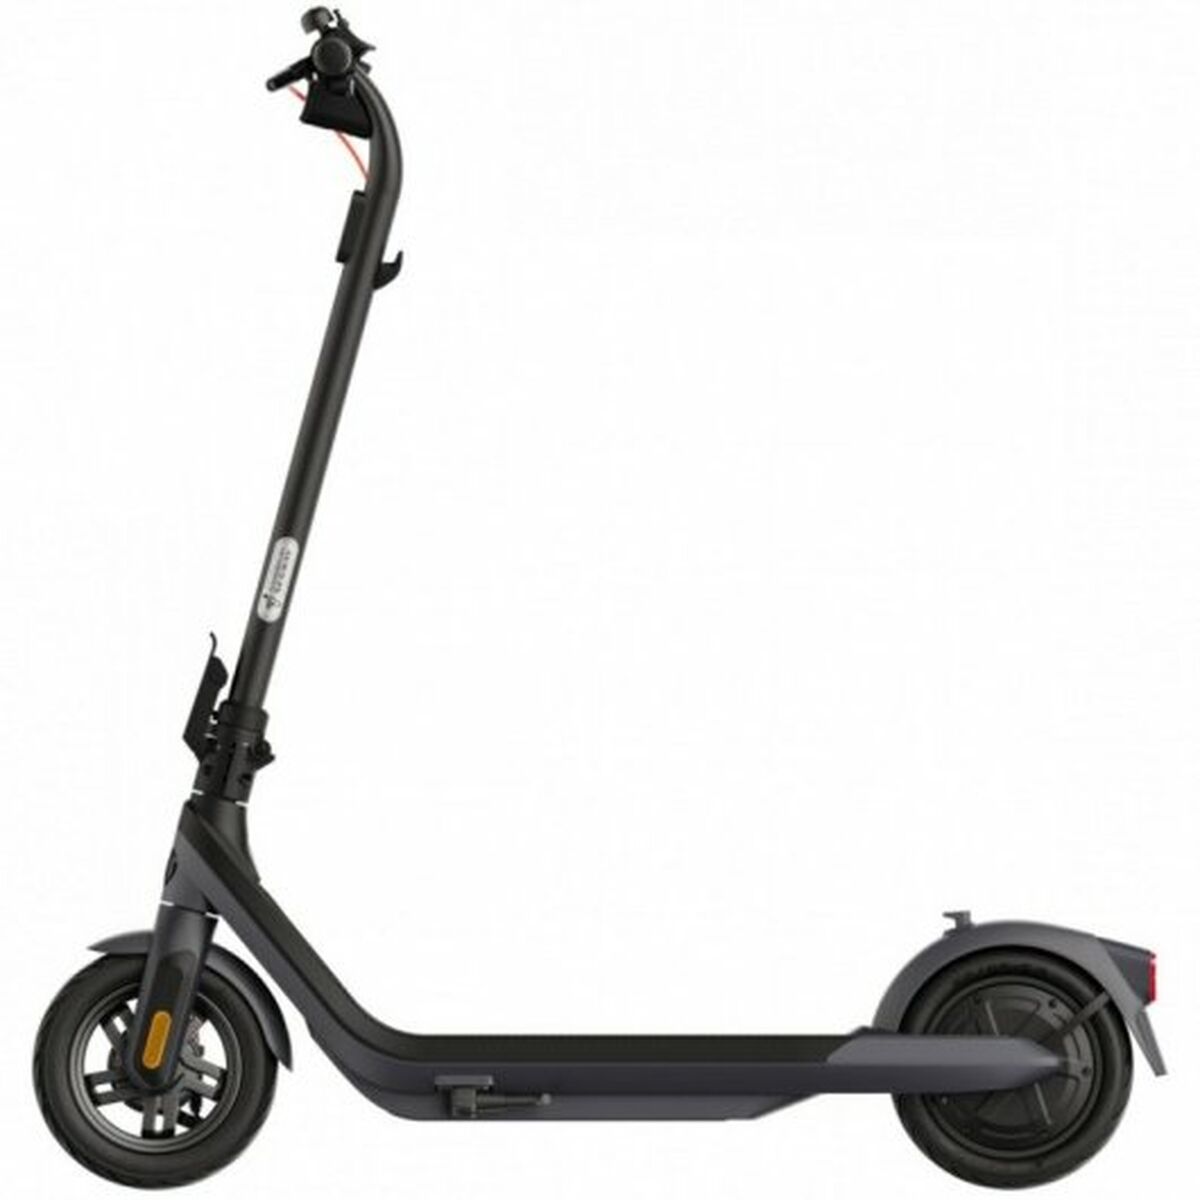 Electric Scooter Segway E2 PRO E Black 350 W, Segway, Sports and outdoors, Urban mobility, electric-scooter-segway-e2-pro-e-black-350-w, Brand_Segway, category-reference-2609, category-reference-2629, category-reference-2904, category-reference-t-19681, category-reference-t-19756, category-reference-t-19876, category-reference-t-21245, category-reference-t-25387, Condition_NEW, deportista / en forma, Price_400 - 500, RiotNook